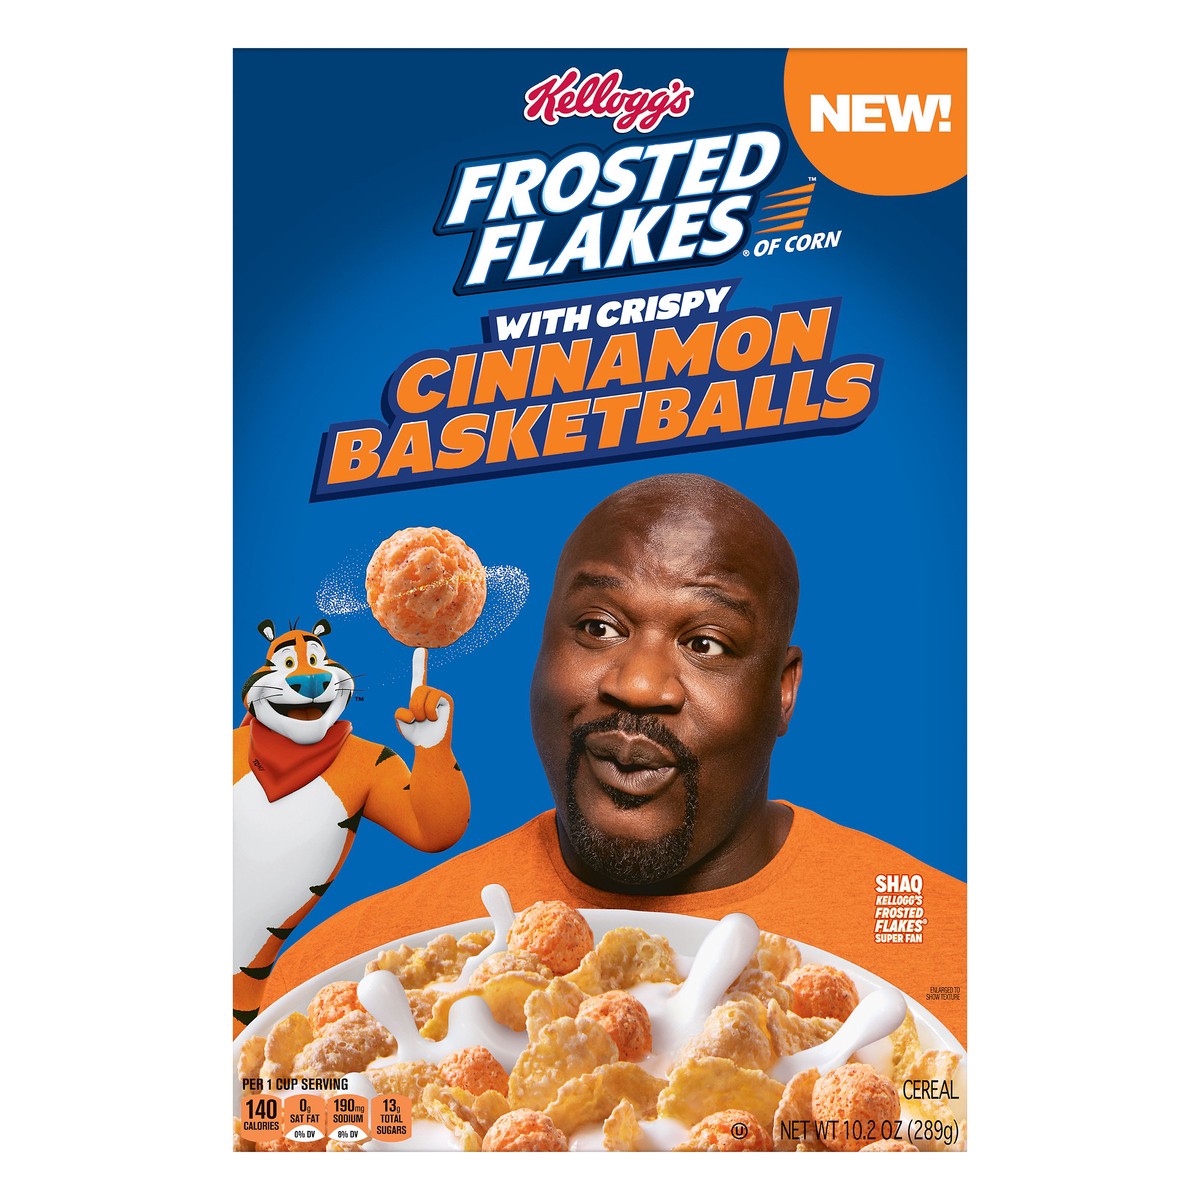 slide 1 of 8, Frosted Flakes Kellogg's Frosted Flakes Breakfast Cereal, 8 Vitamins and Minerals, Kids Snacks, Original with Crispy Cinnamon Basketballs, 10.2oz Box, 1 Box, 10.2 oz